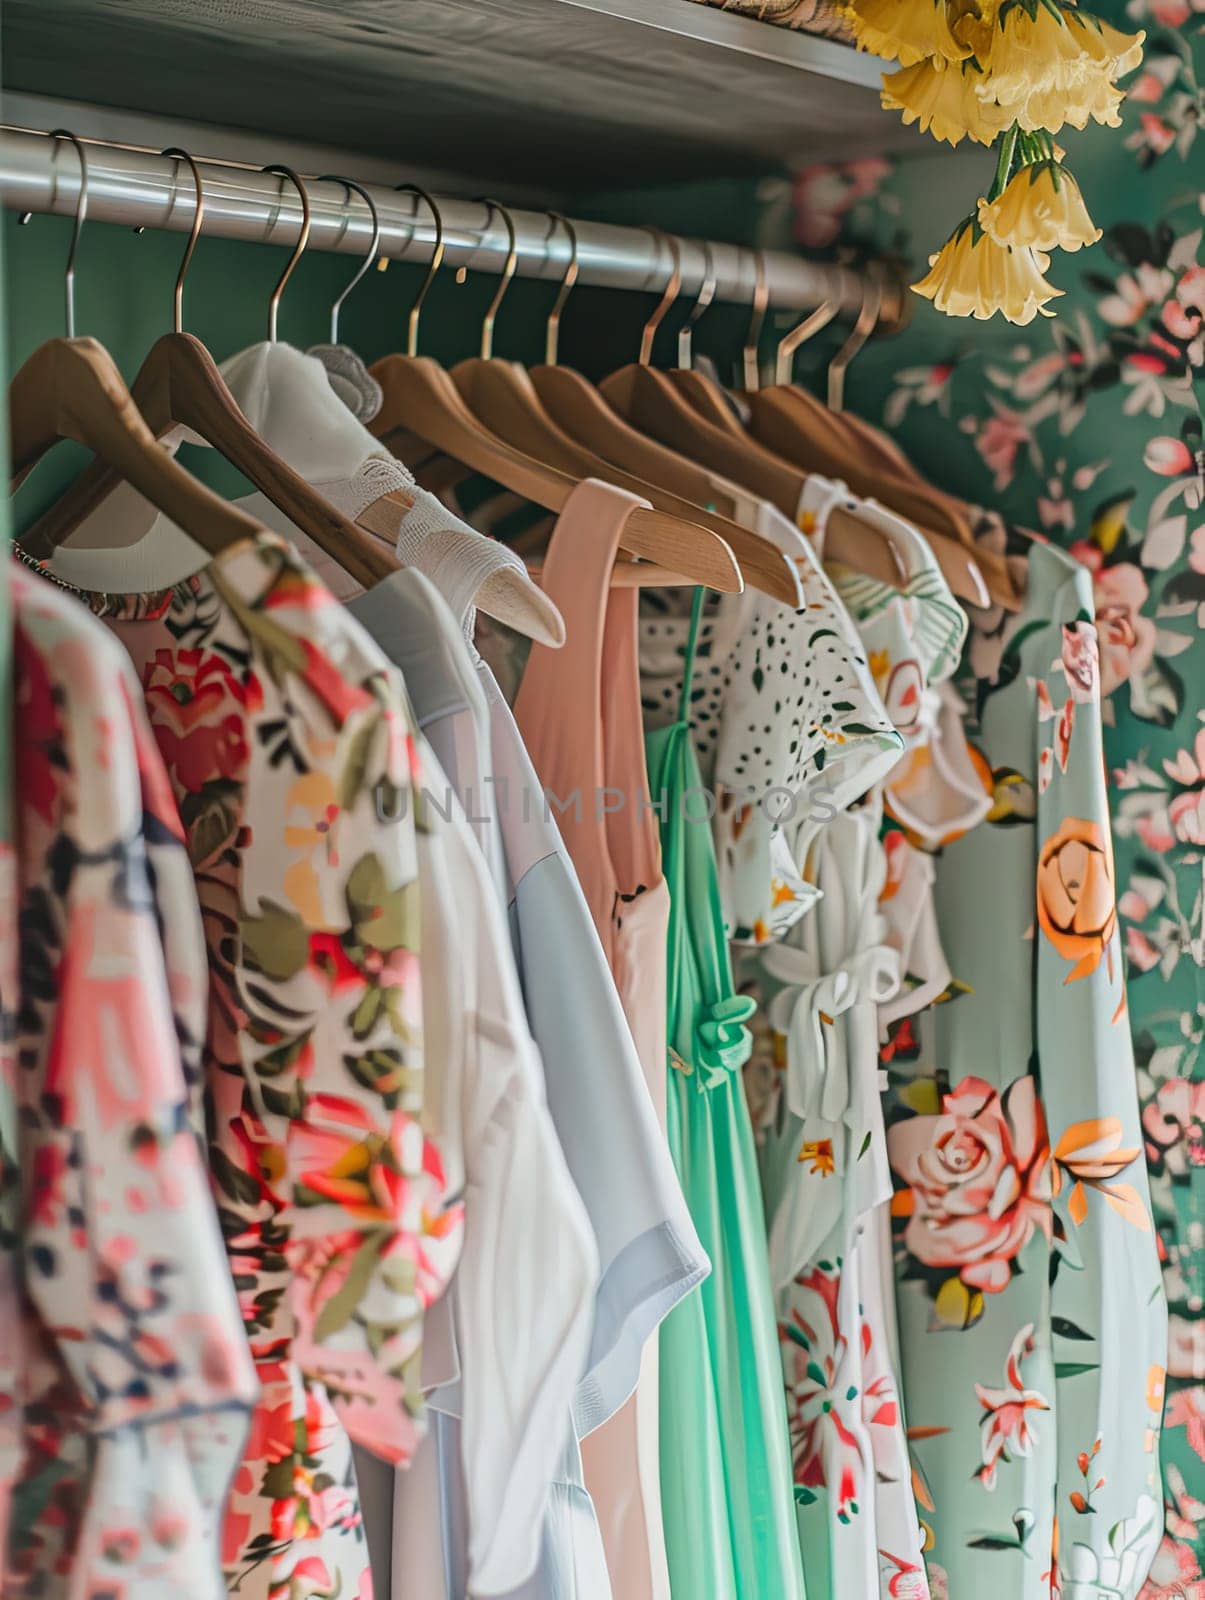 Summer closet with dresses and shirts hanging on racks in a creative womens clothing showroom.